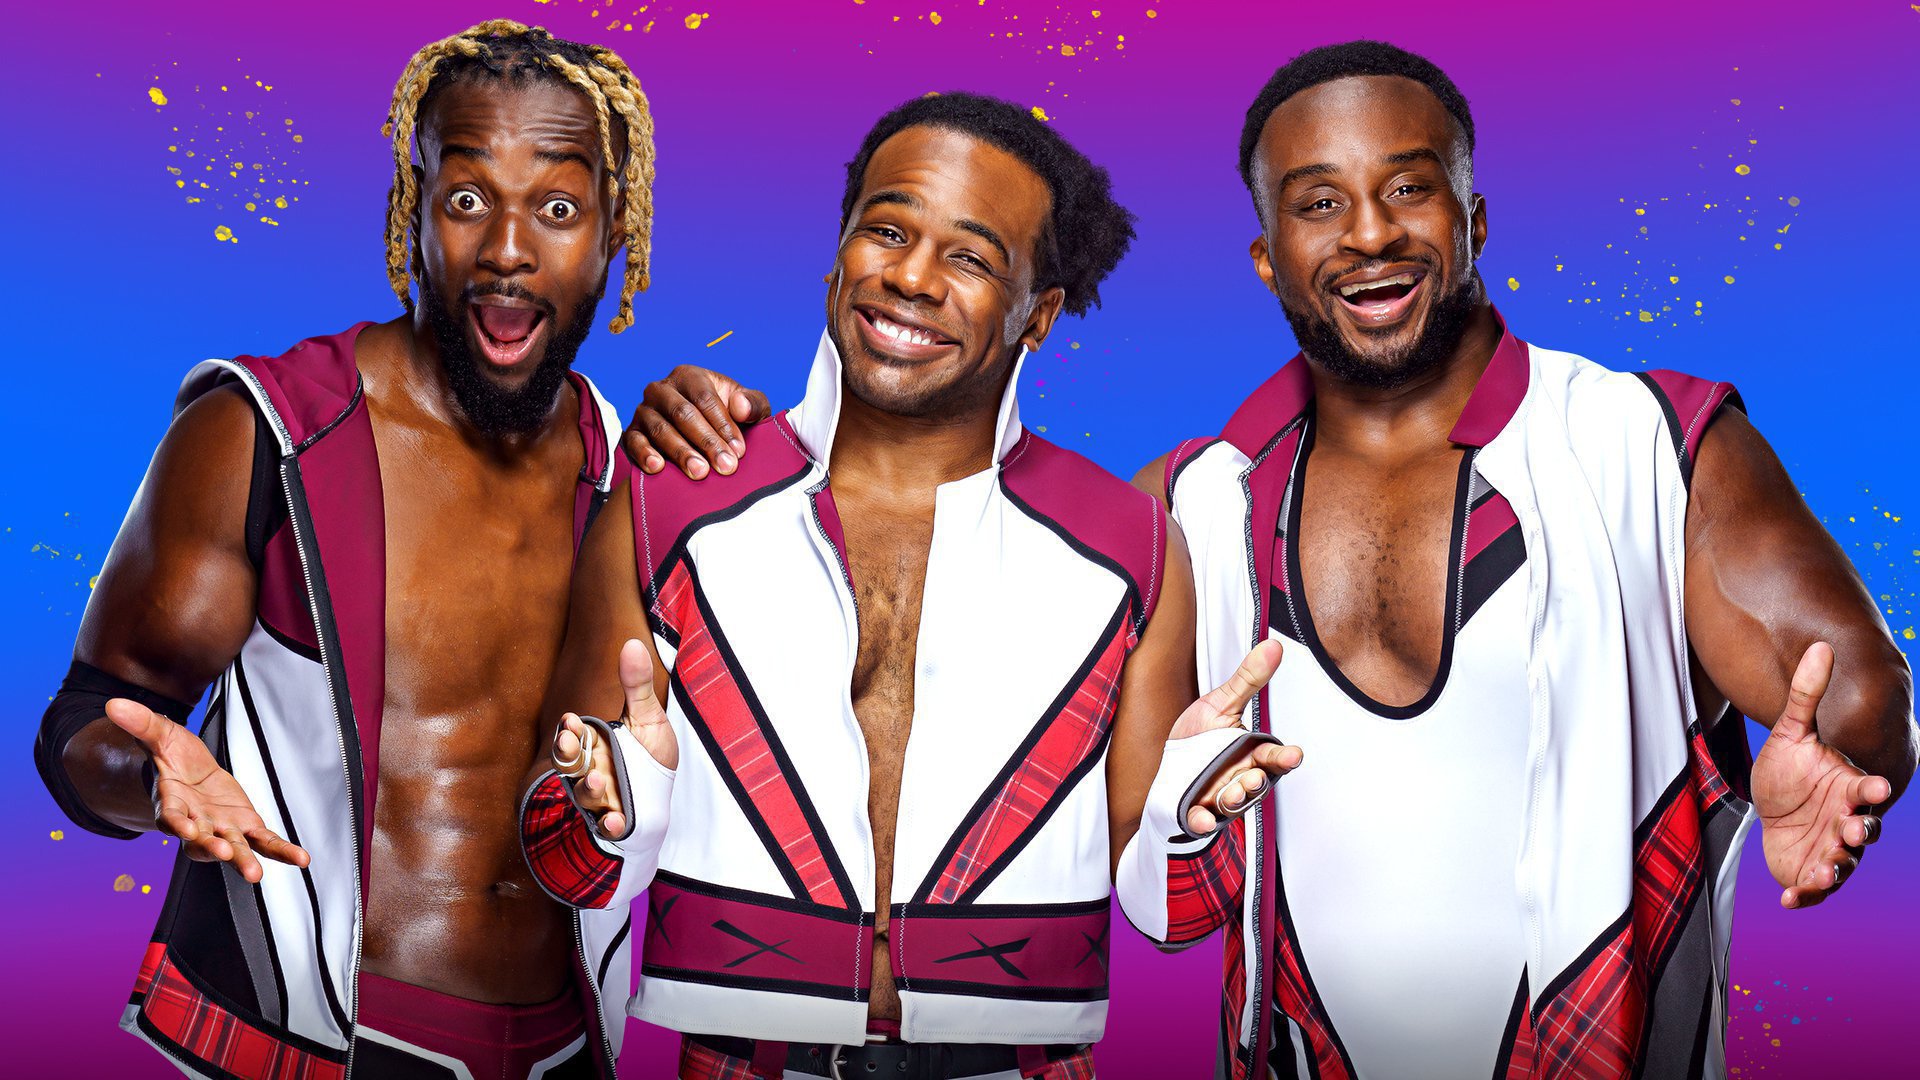 Can The New Day recover from a bungled intro?: The New Day Feel the Power,  June 7, 2021